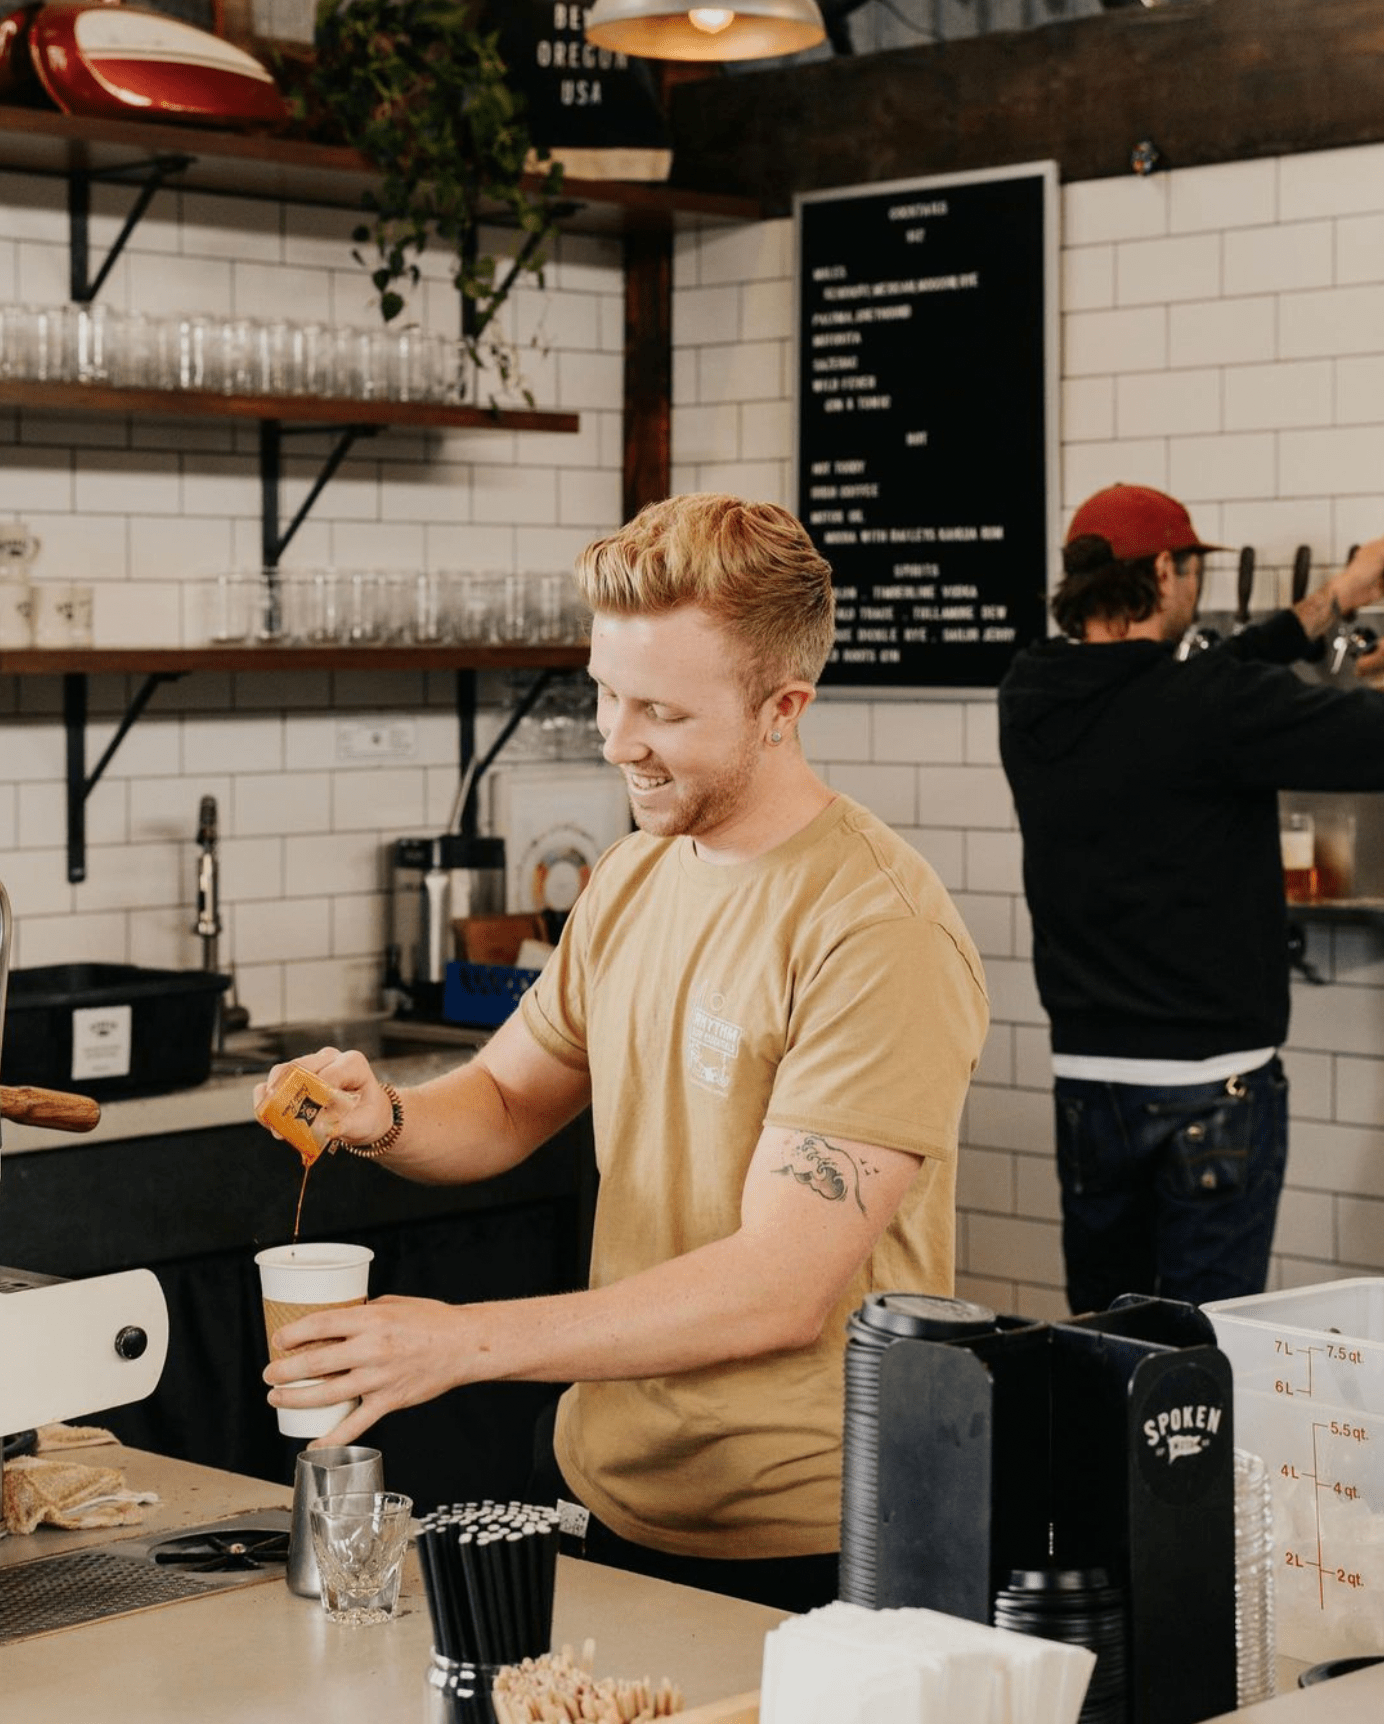 A barista pouring coffee into a cup in a coffee shop.